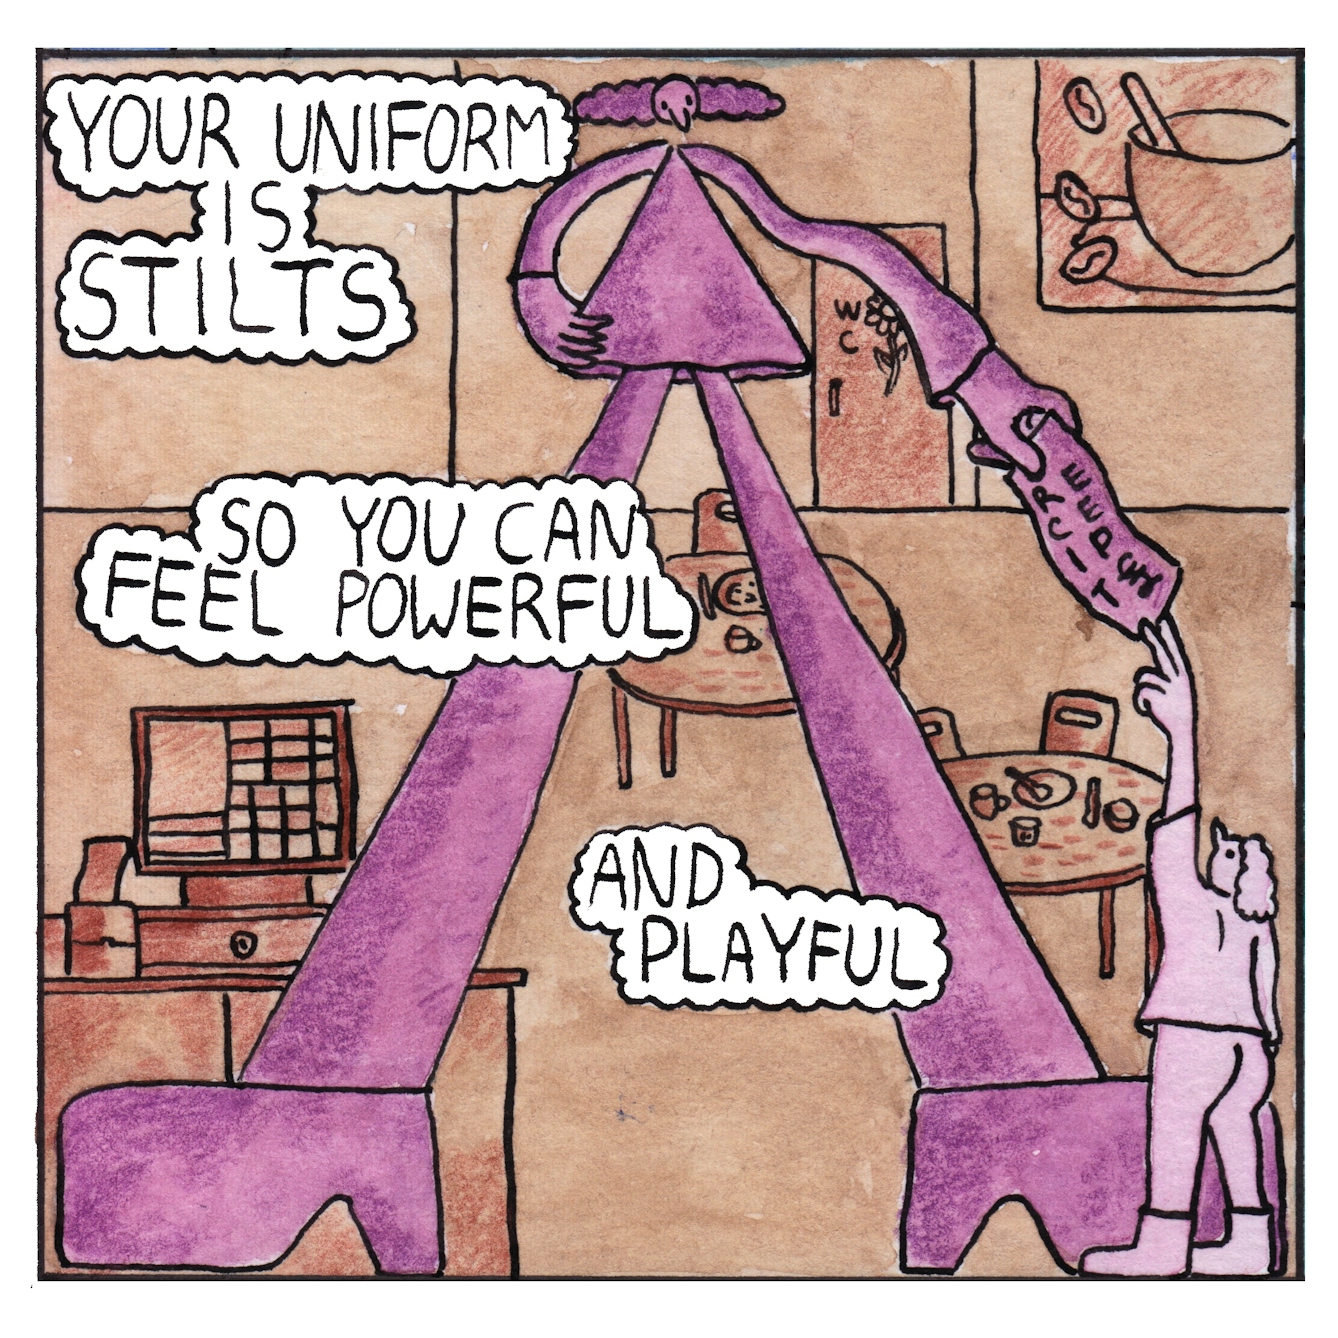 Panel 3 of a six-panel comic drawn with ink, watercolour and colour pencils: The background is the interior of a brown coffee shop with tables and a cash register. In the foreground is a very long-legged purple character with platform shoes. They tower above a smaller person, who comes up to their knees, while handing the small customer a receipt. Three text bubbles reads: "Your uniform is stilts, so you can feel powerful and playful"